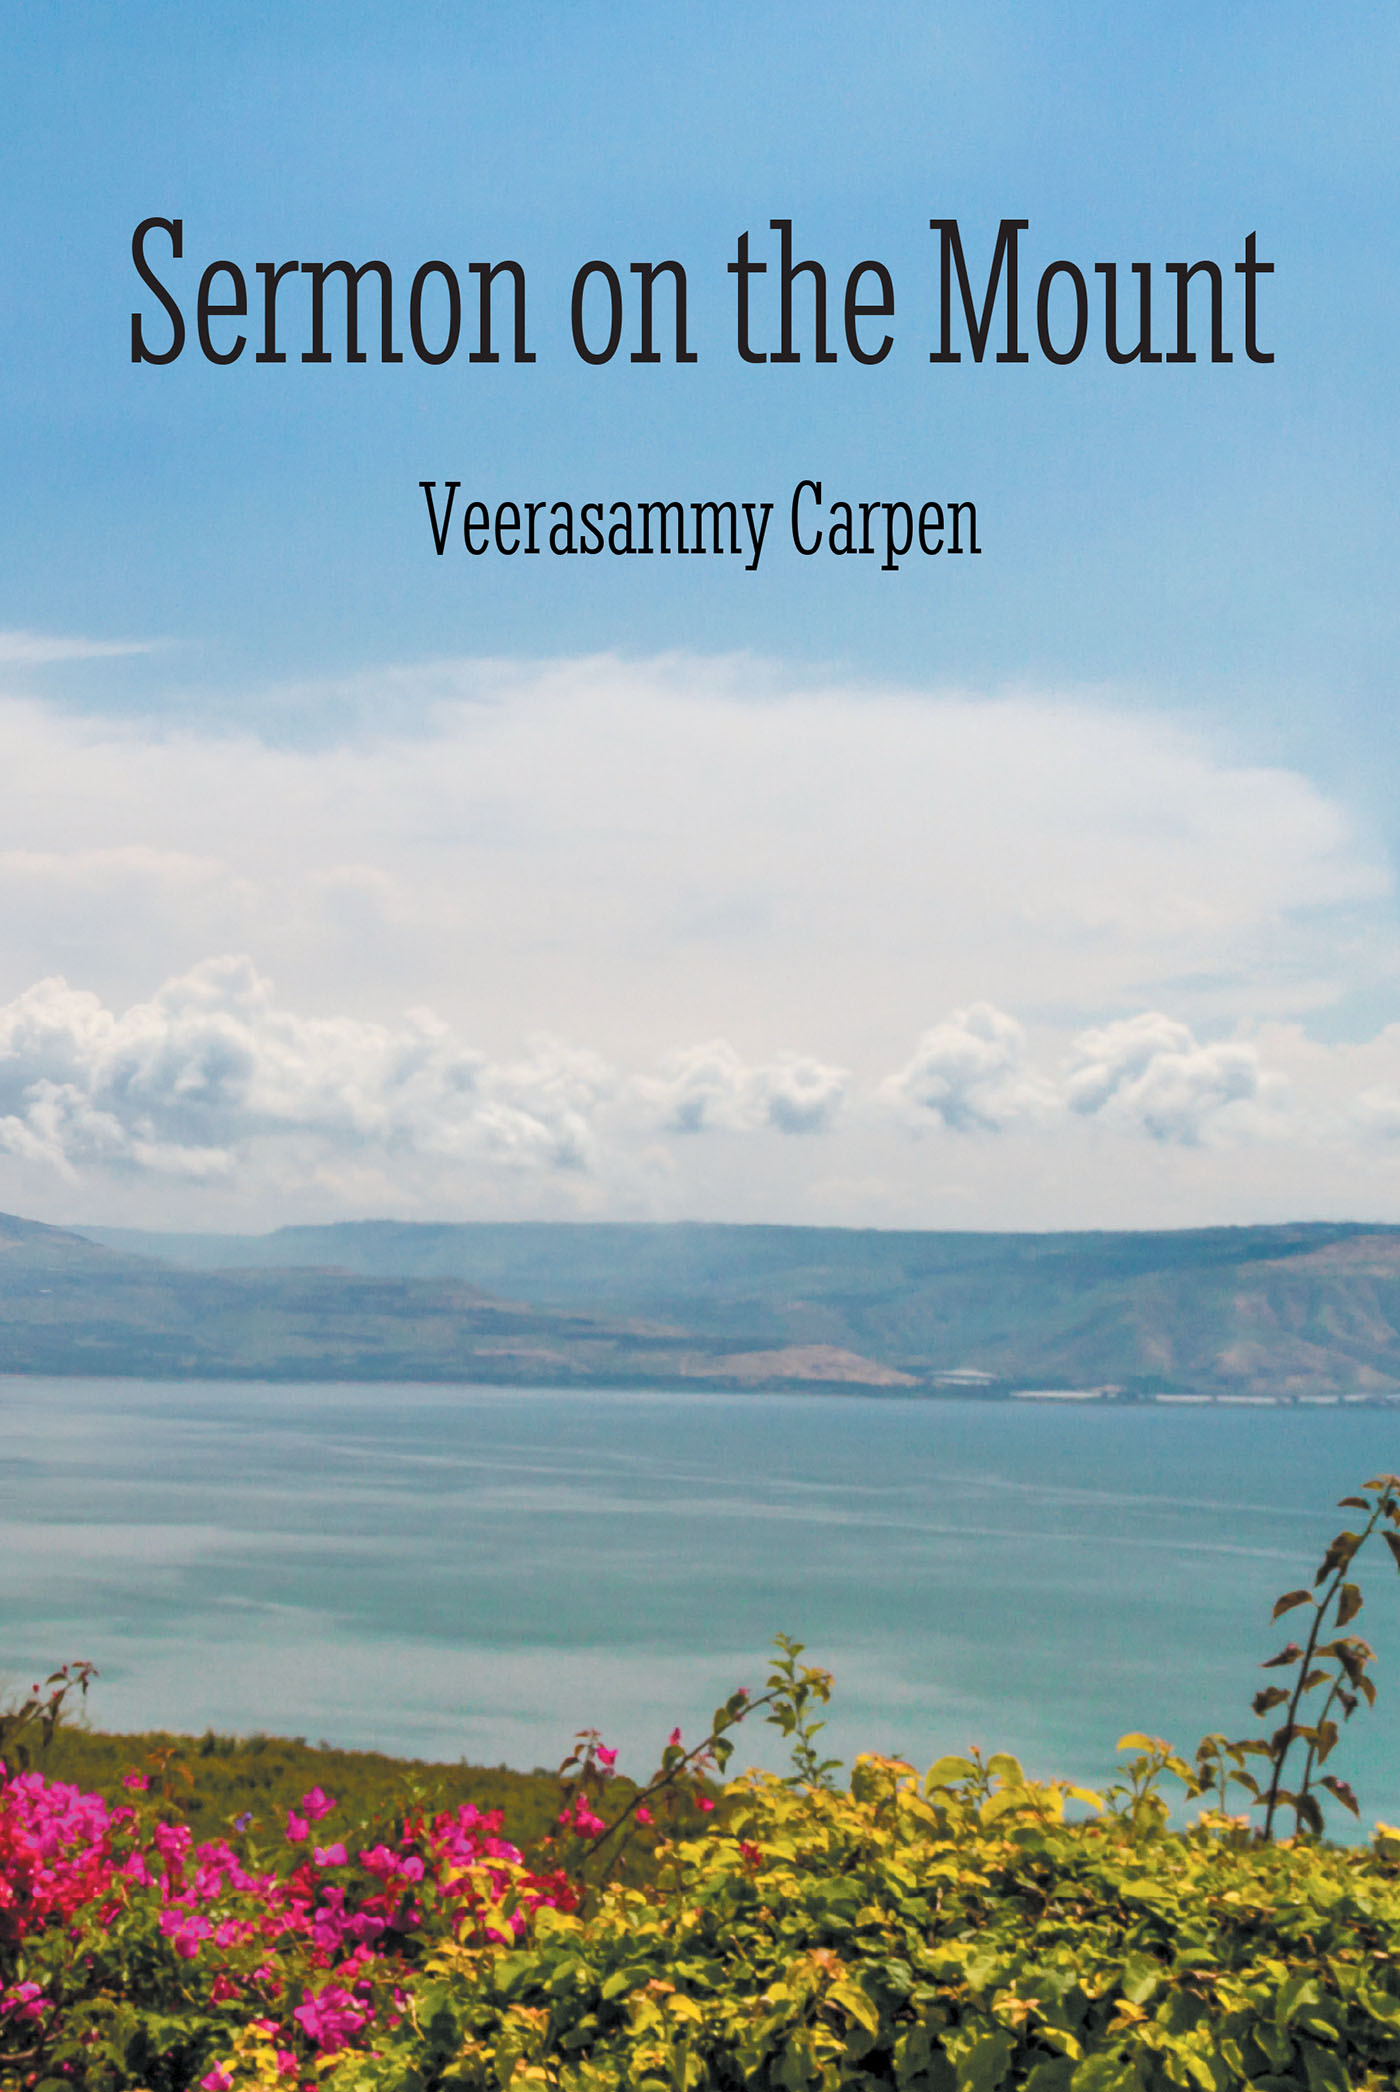 Veerasammy Carpen’s Newly Released “Sermon on the Mount” is an Engaging Examination of the Moral Teachings Found Within the Book of Matthew